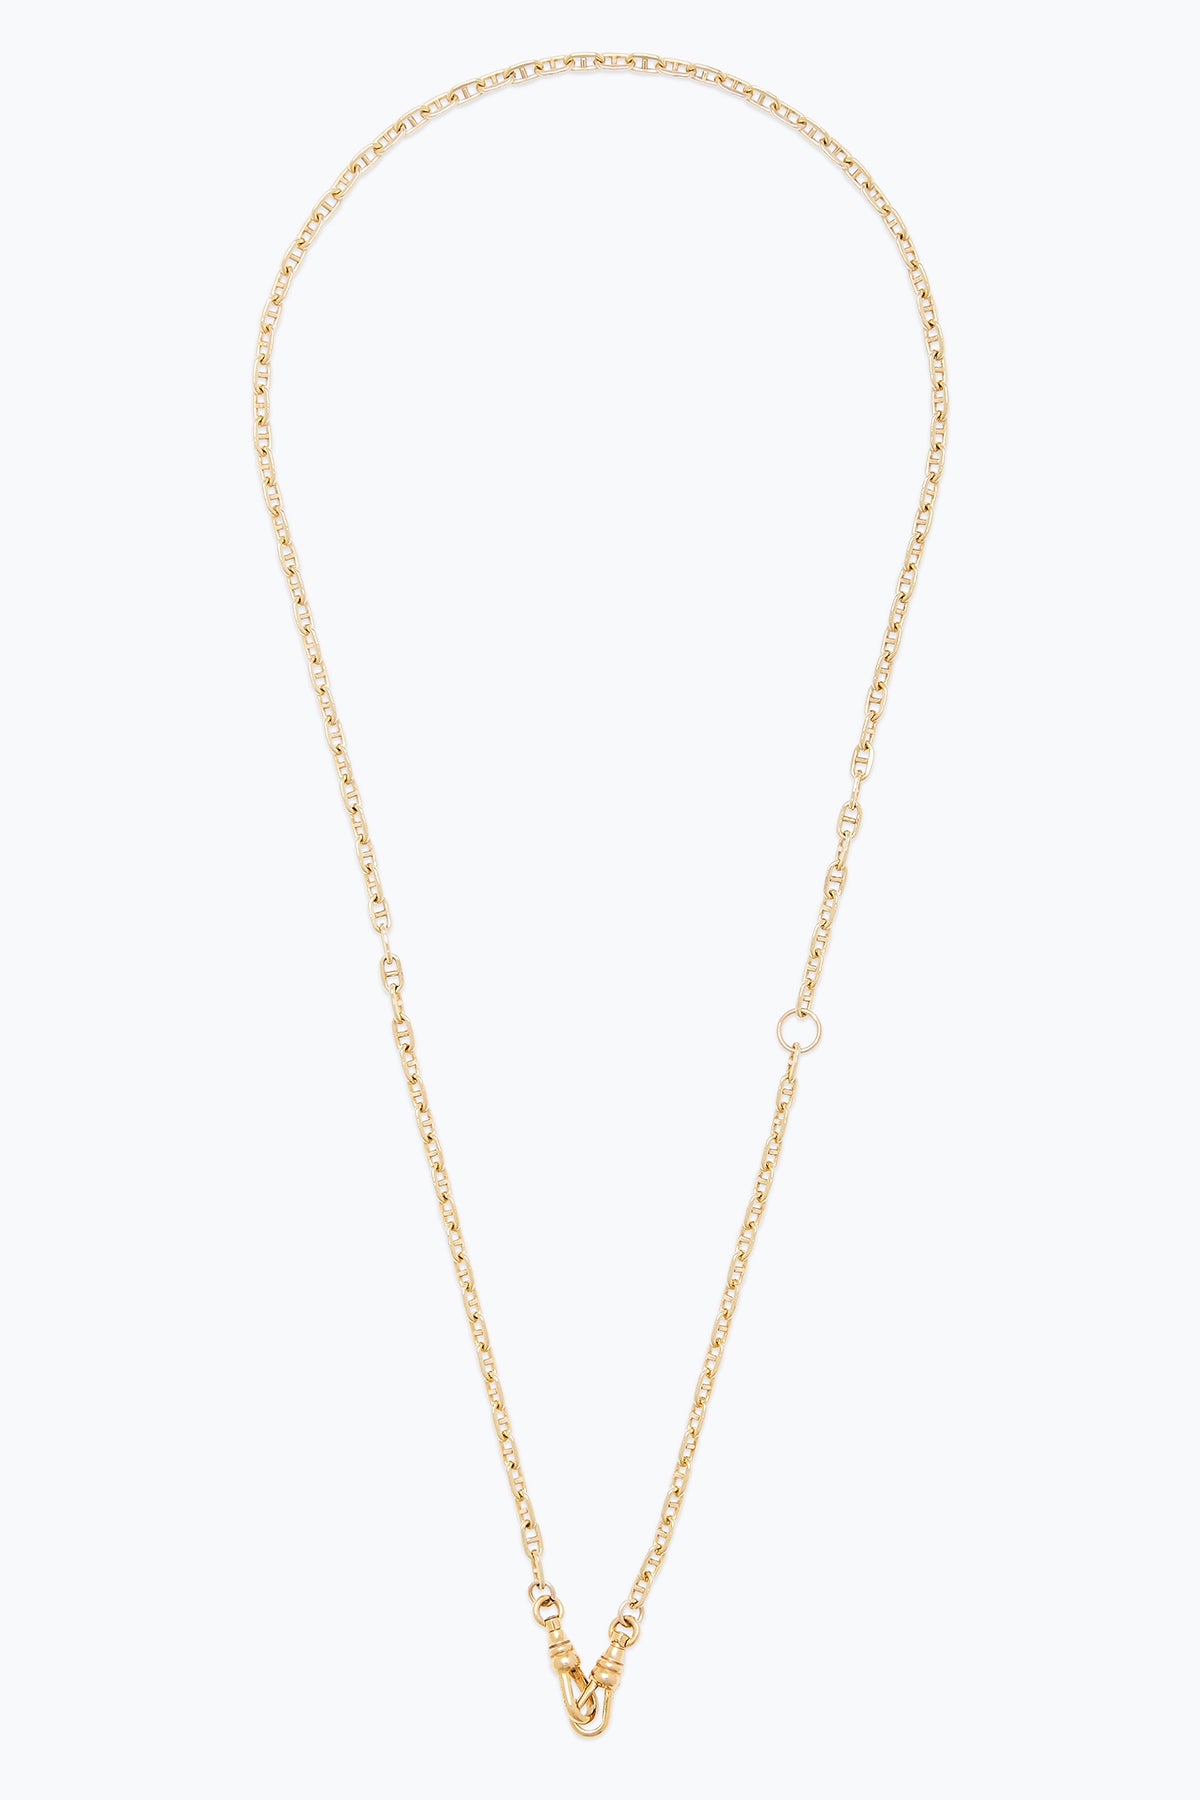 Gucci Link Necklace Gold by Phyllis & Rosie 2-23749517934785